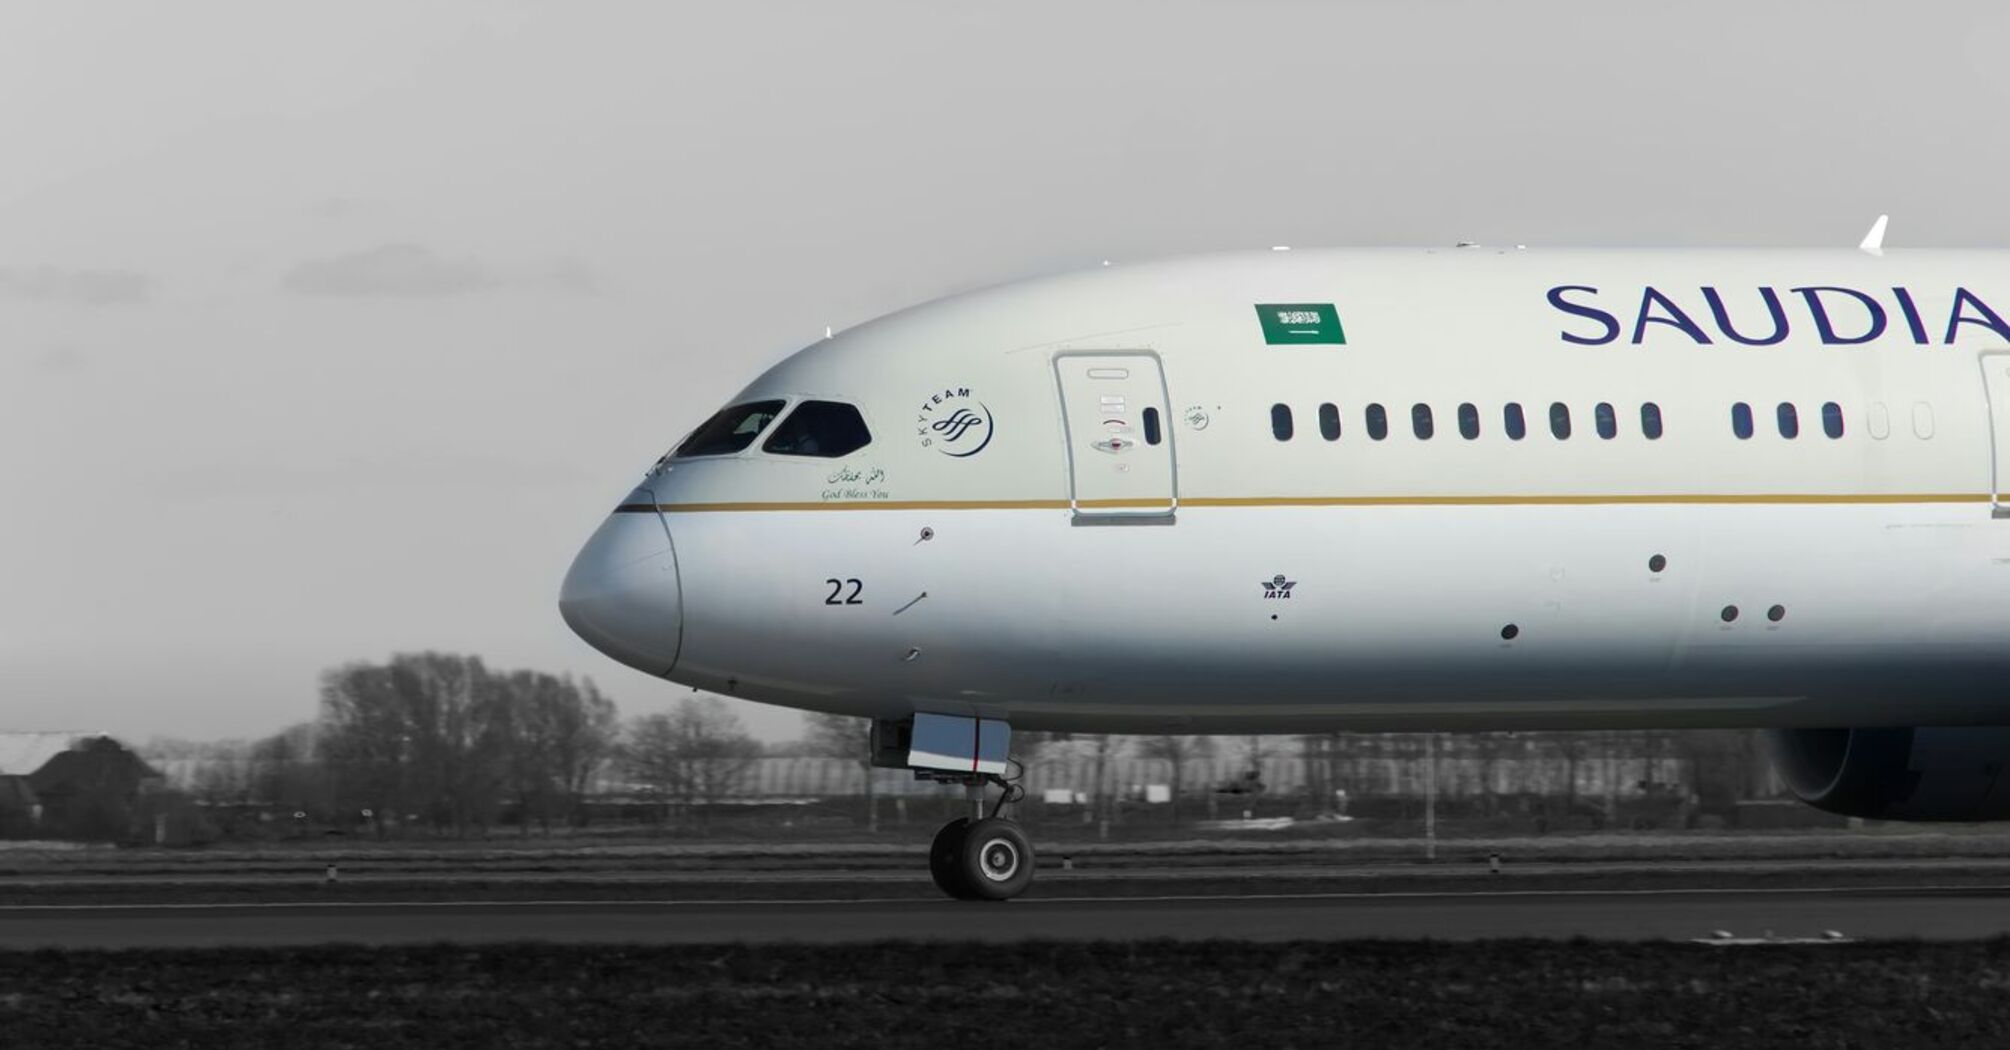 A Saudia Boeing 787 aircraft on the runway, side view, with a grayscale background highlighting the plane's livery 